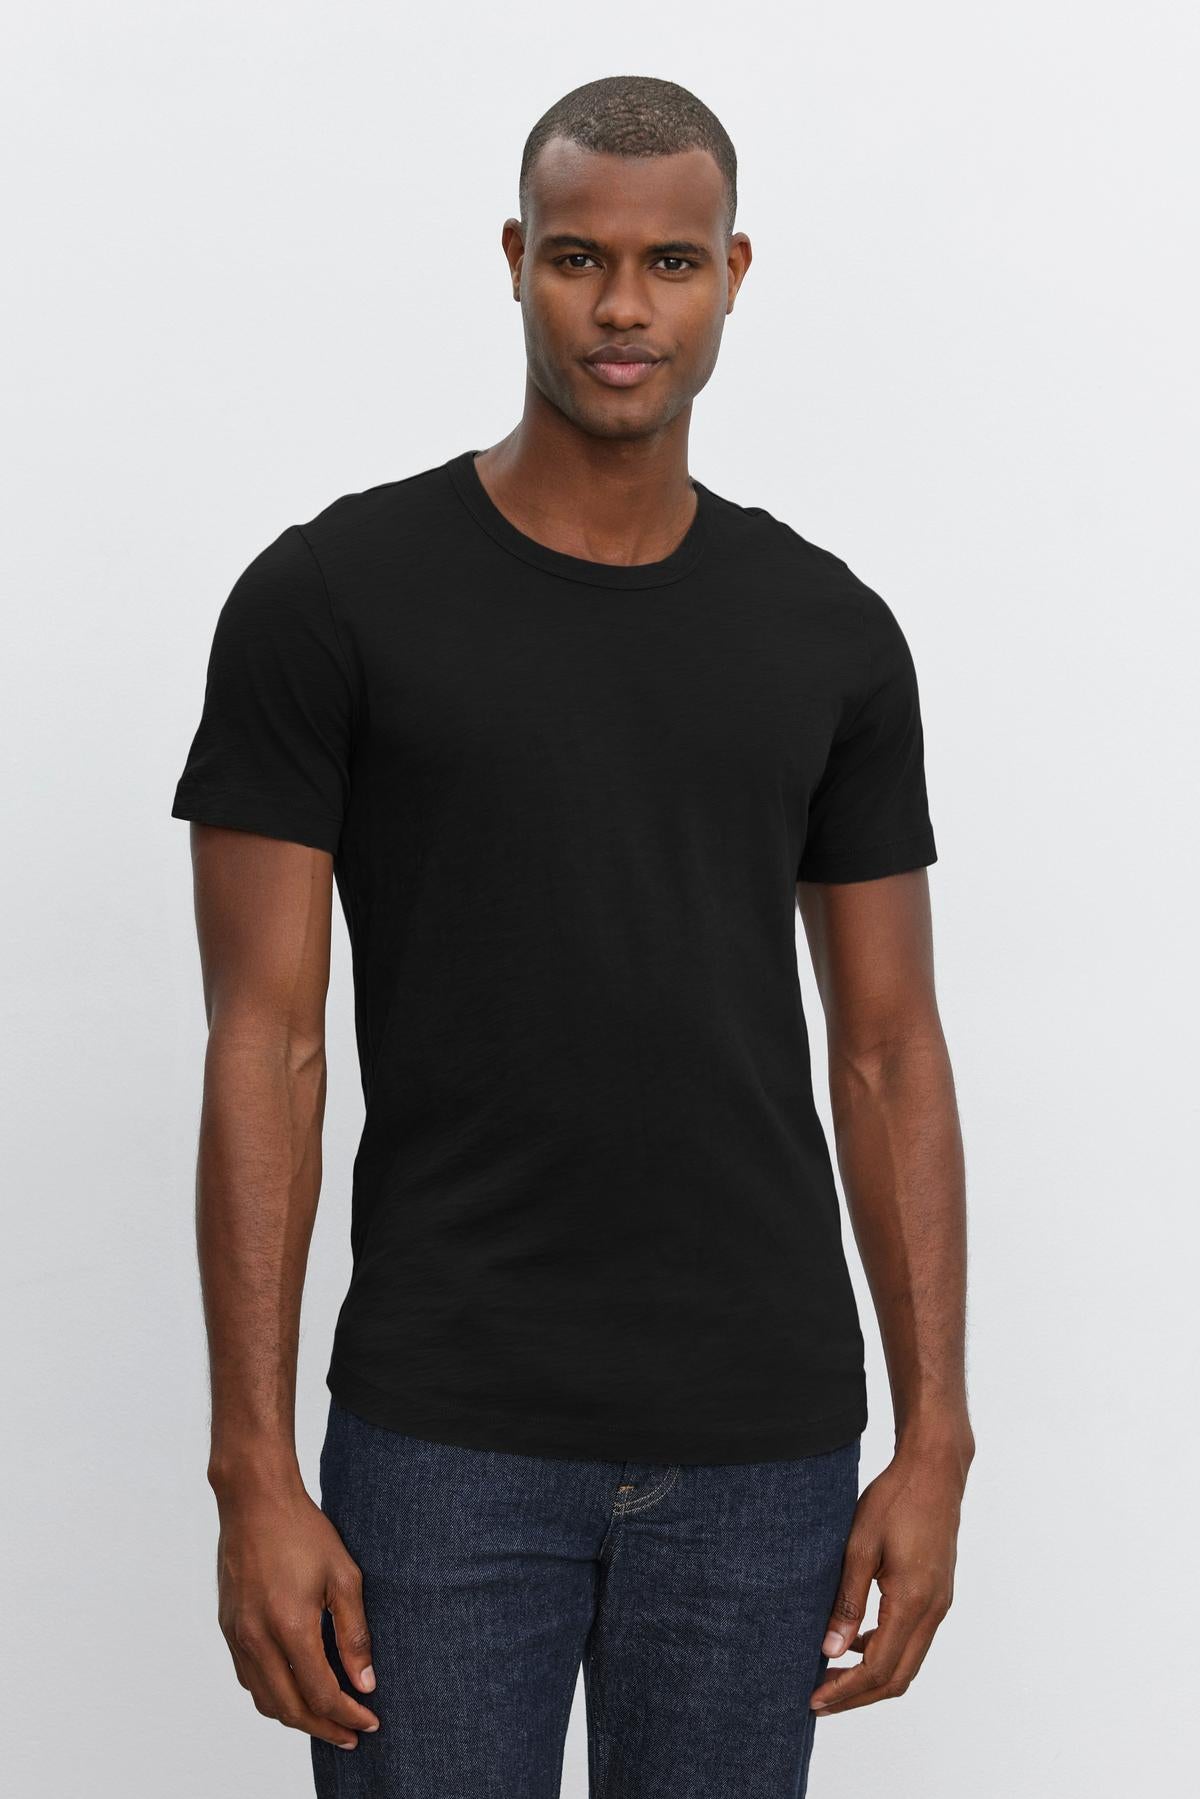 A man wearing a black Velvet by Graham & Spencer crew neck AMARO TEE and blue jeans standing against a white background.-36273921982657